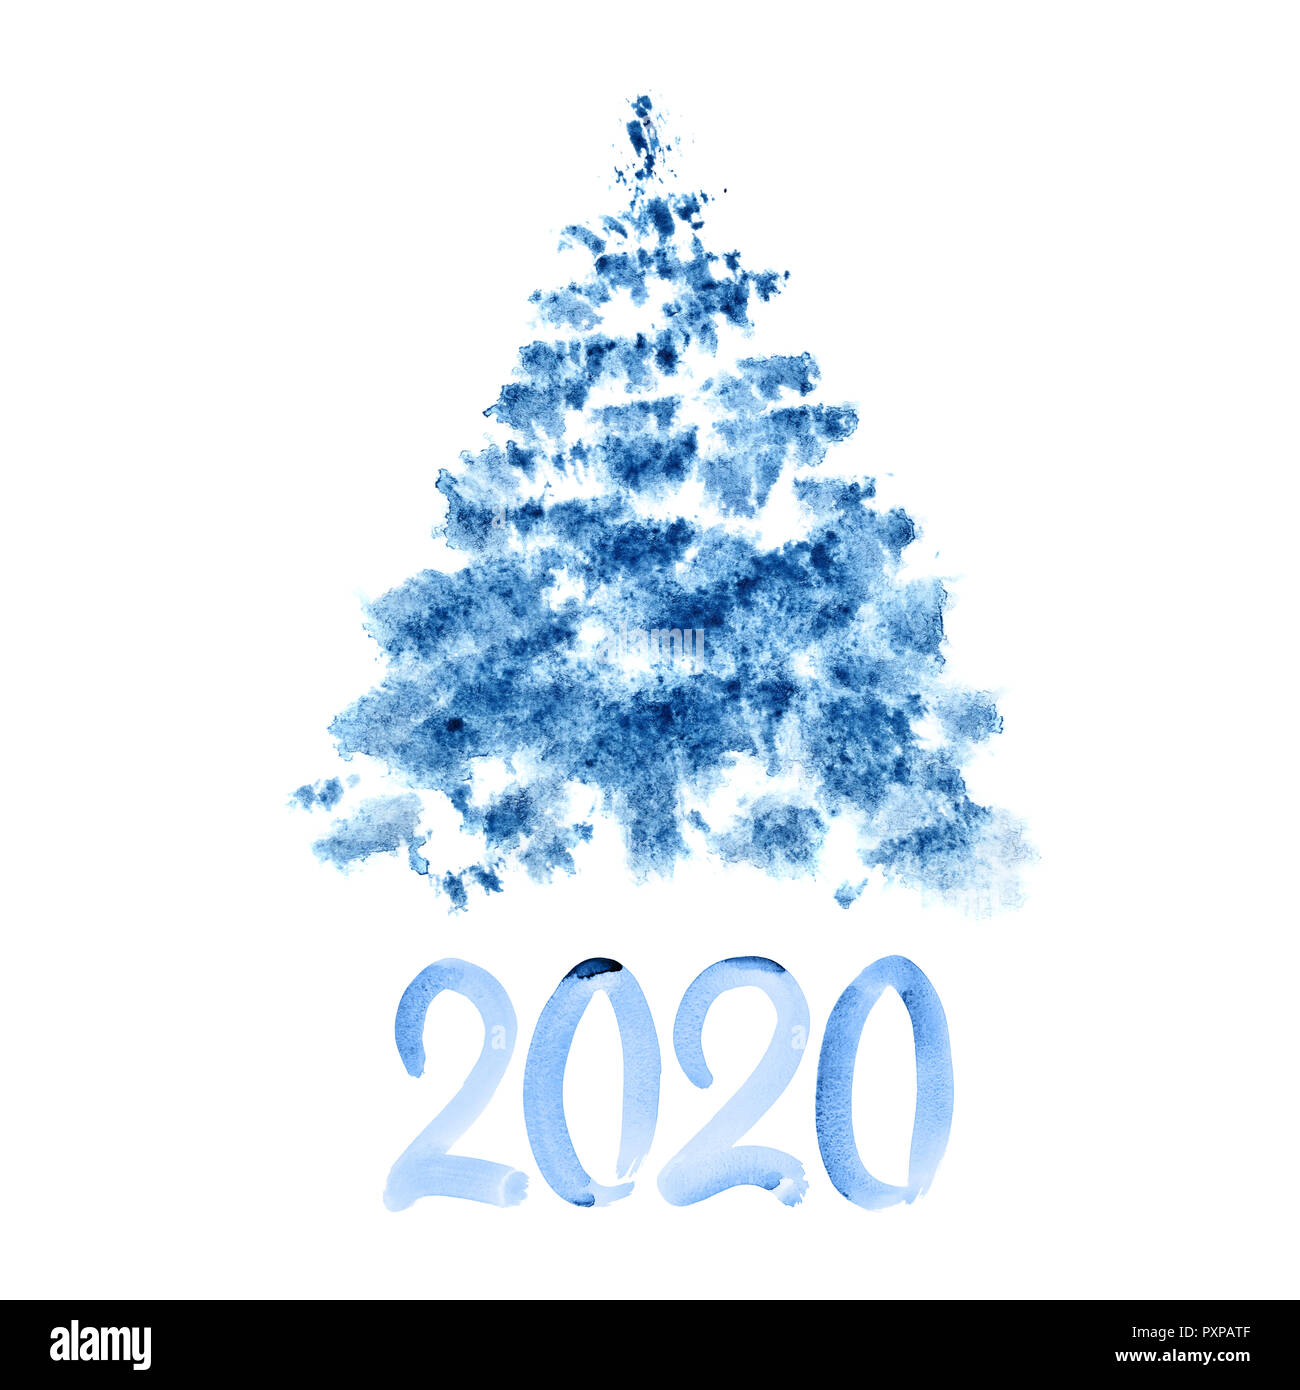 Natale 2020.New Year 2020 Blue Watercolor Christmas Tree Stock Photo Alamy